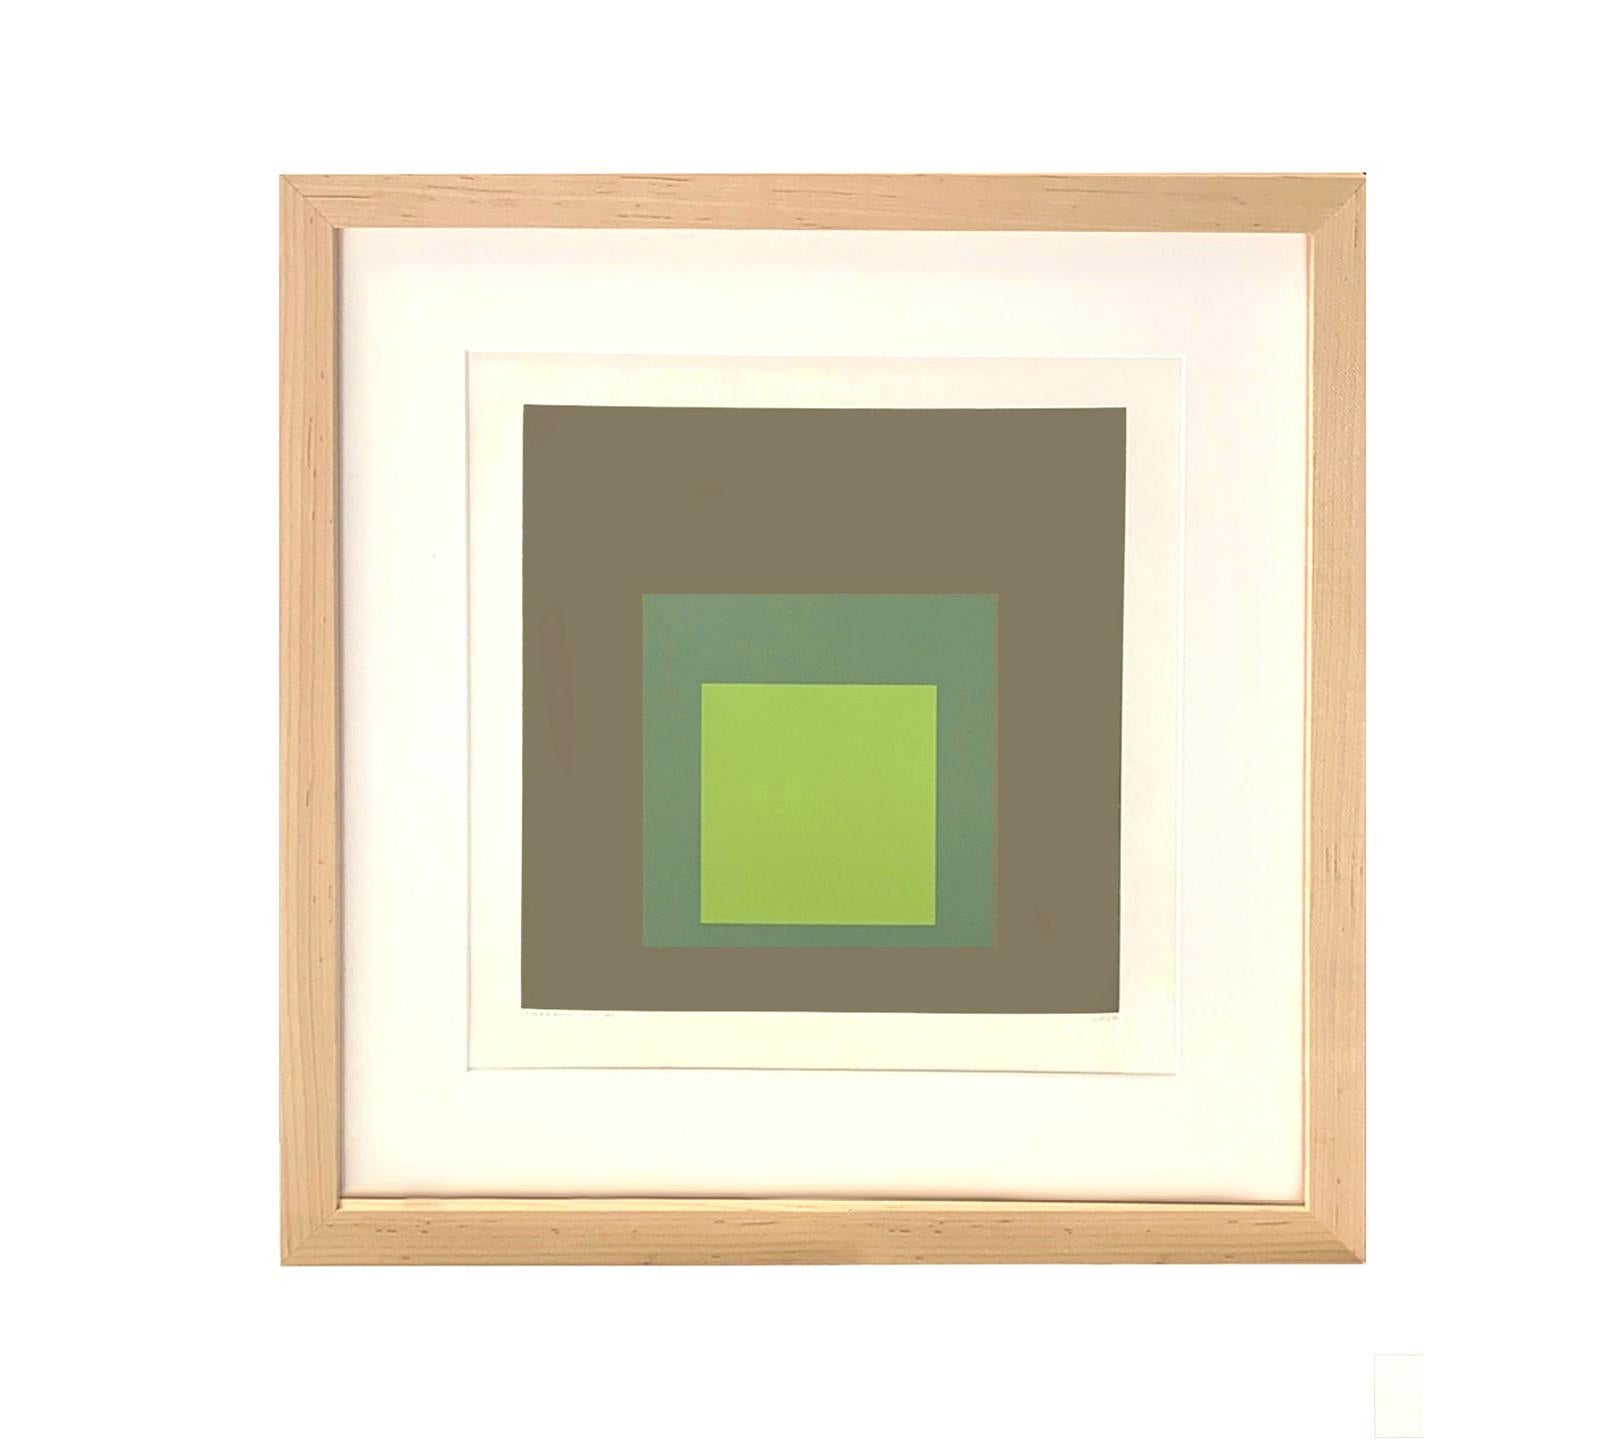 JOSEF ALBERS
 "Tuscany"
 Color screenprint on Mohawk Superfine Bristol paper, 1966
Image Size: 11” x 11” inches, full margins
Initialed by artist, titled, dated and numbered 121/200 in pencil, lower margin
Printed by Sirocco Screenprints, New